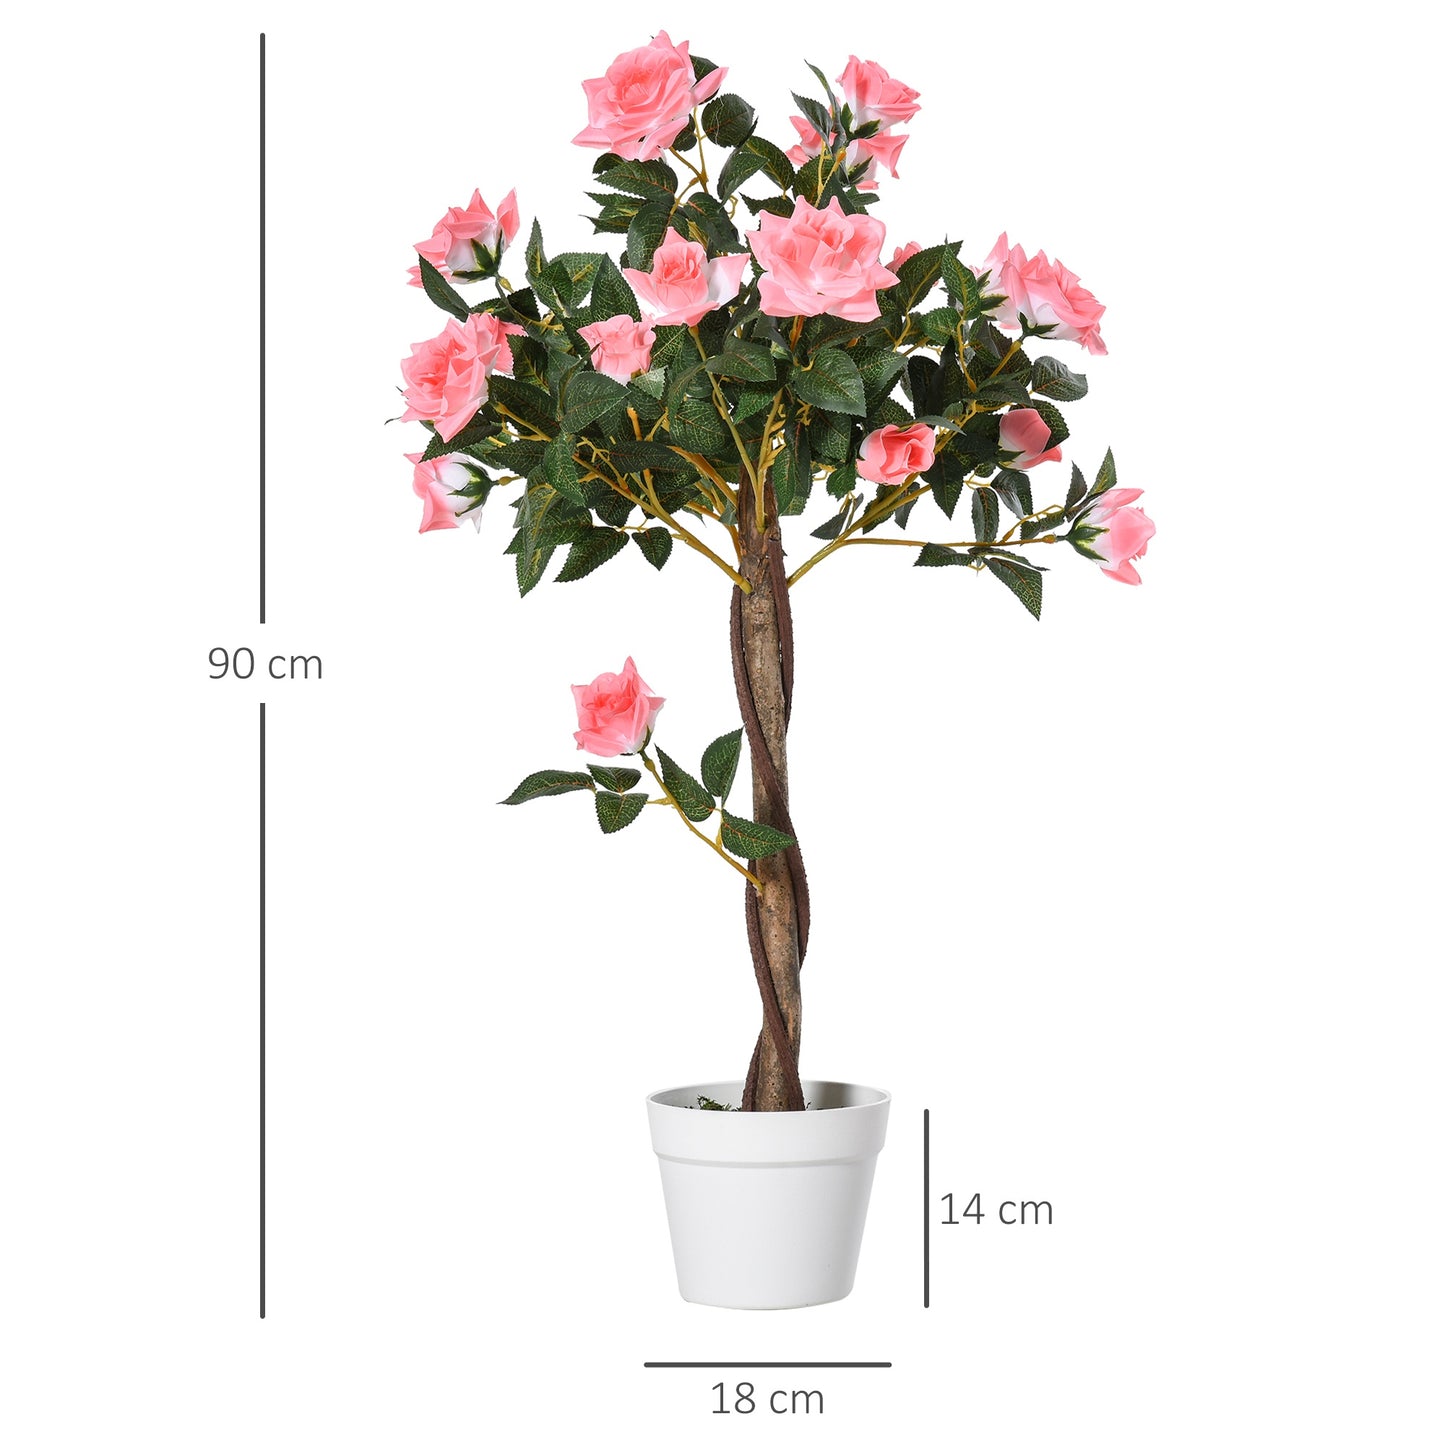 Outsunny Artificial Camellia Plant Realistic Fake Tree Potted Home Office 90cm Pink